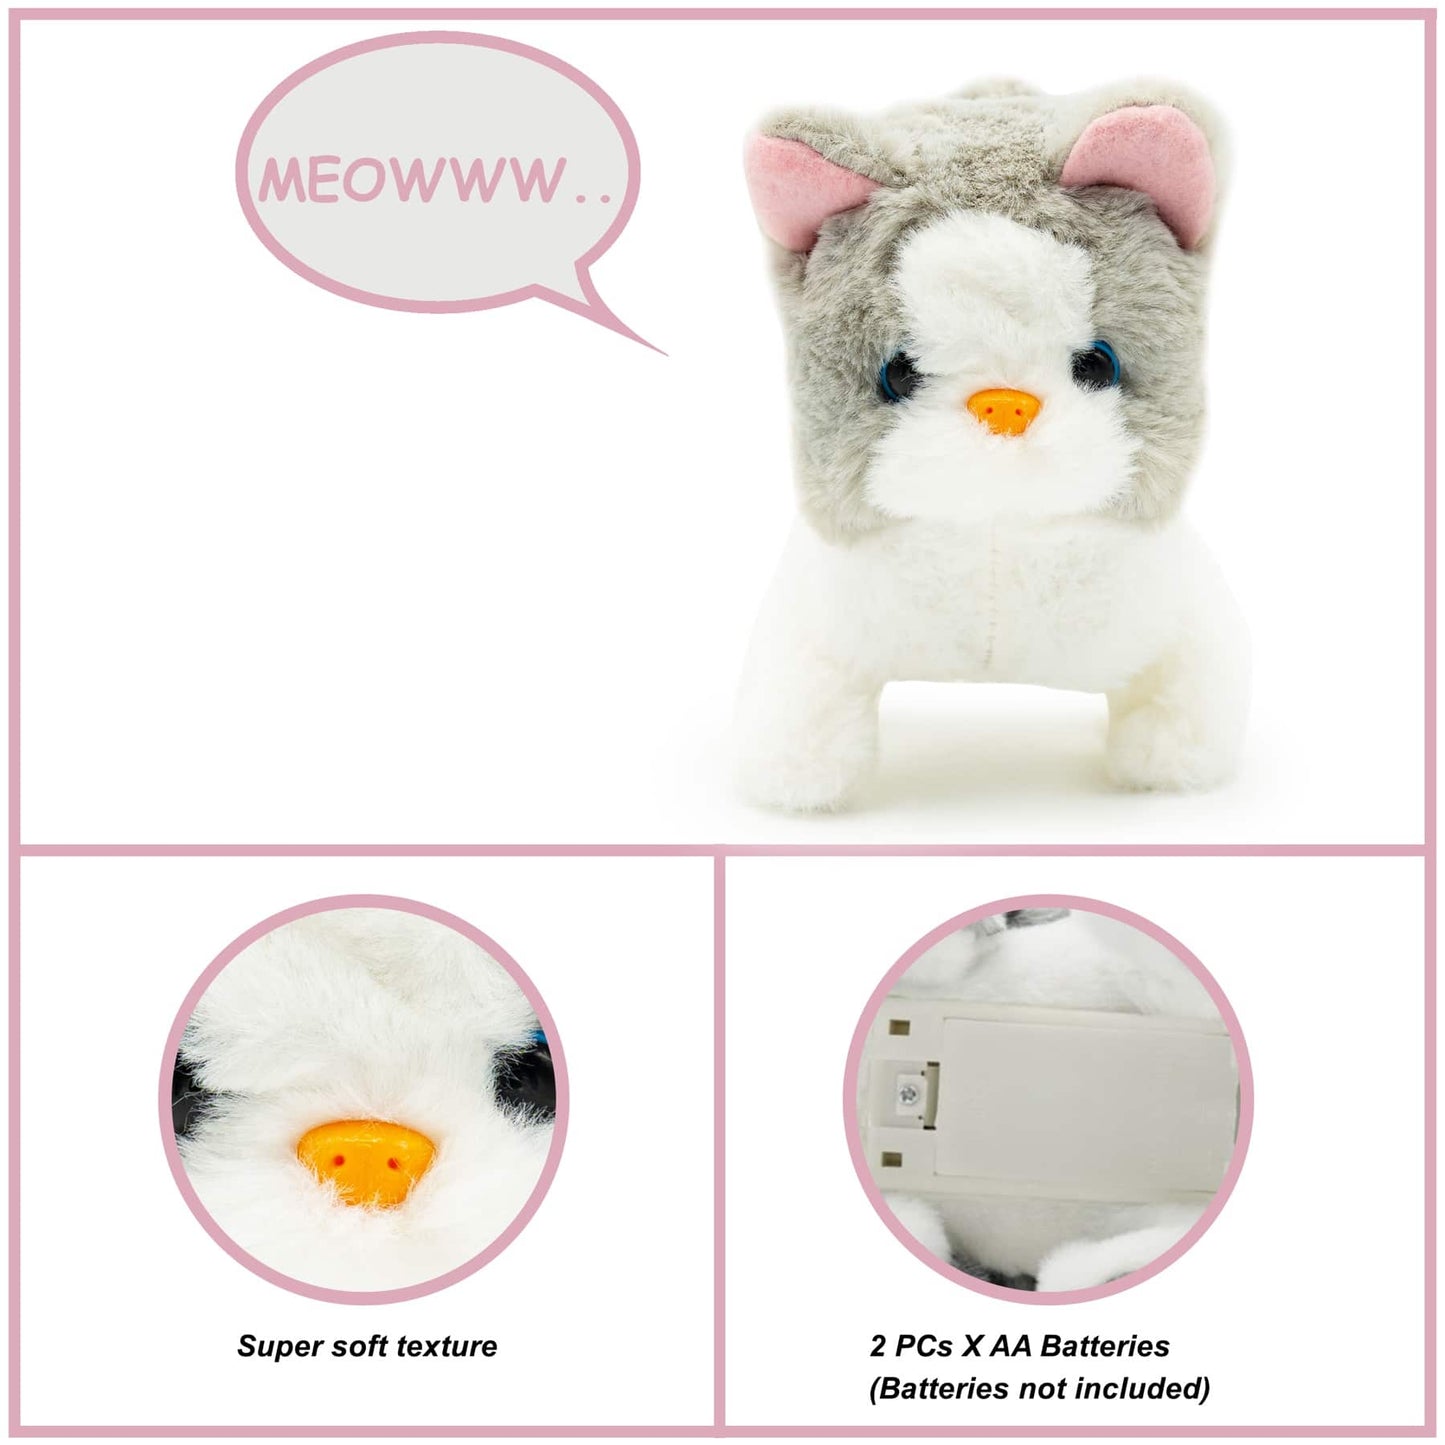 Soft and Fluffy Walking Toys for Kids